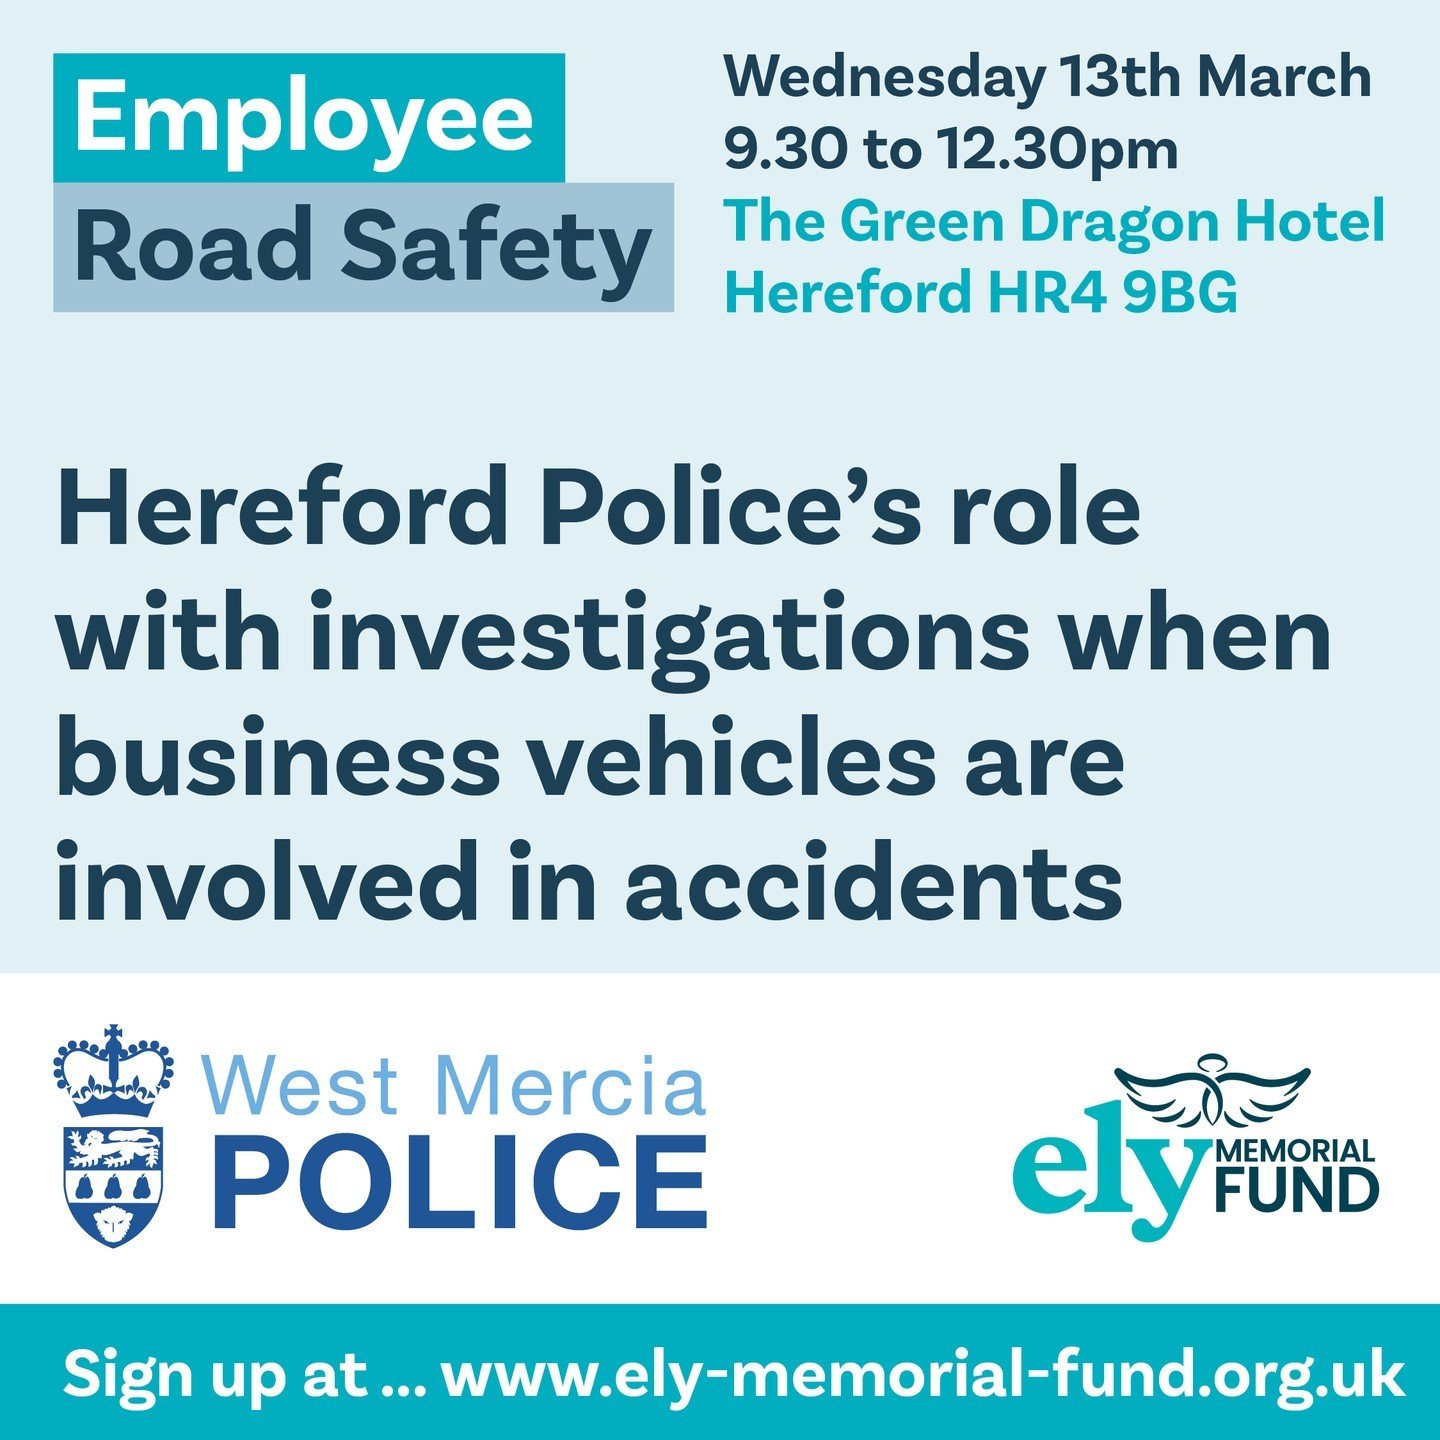 Want to know what Hereford Police's role is when business vehicles are involved in accidents? Find out more at our *FREE* Employee Road Safety Event on Wednesday 13 March.

⏳ Book by 6pm tomorrow to secure your space!
https://ow.ly/ceZF50QPo1c

#driv